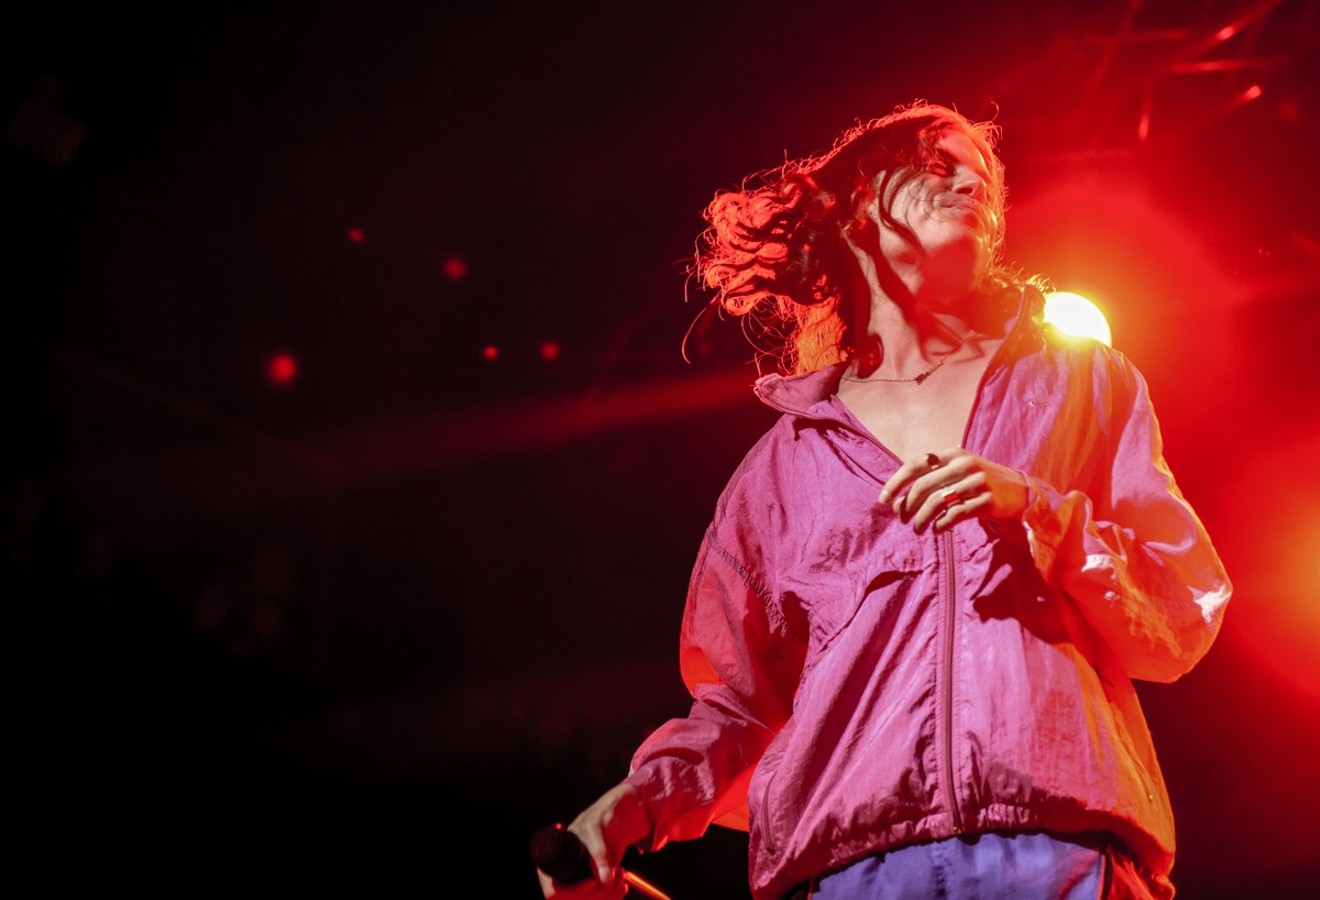 View more photos of Børns' performance at Revolution Live here.